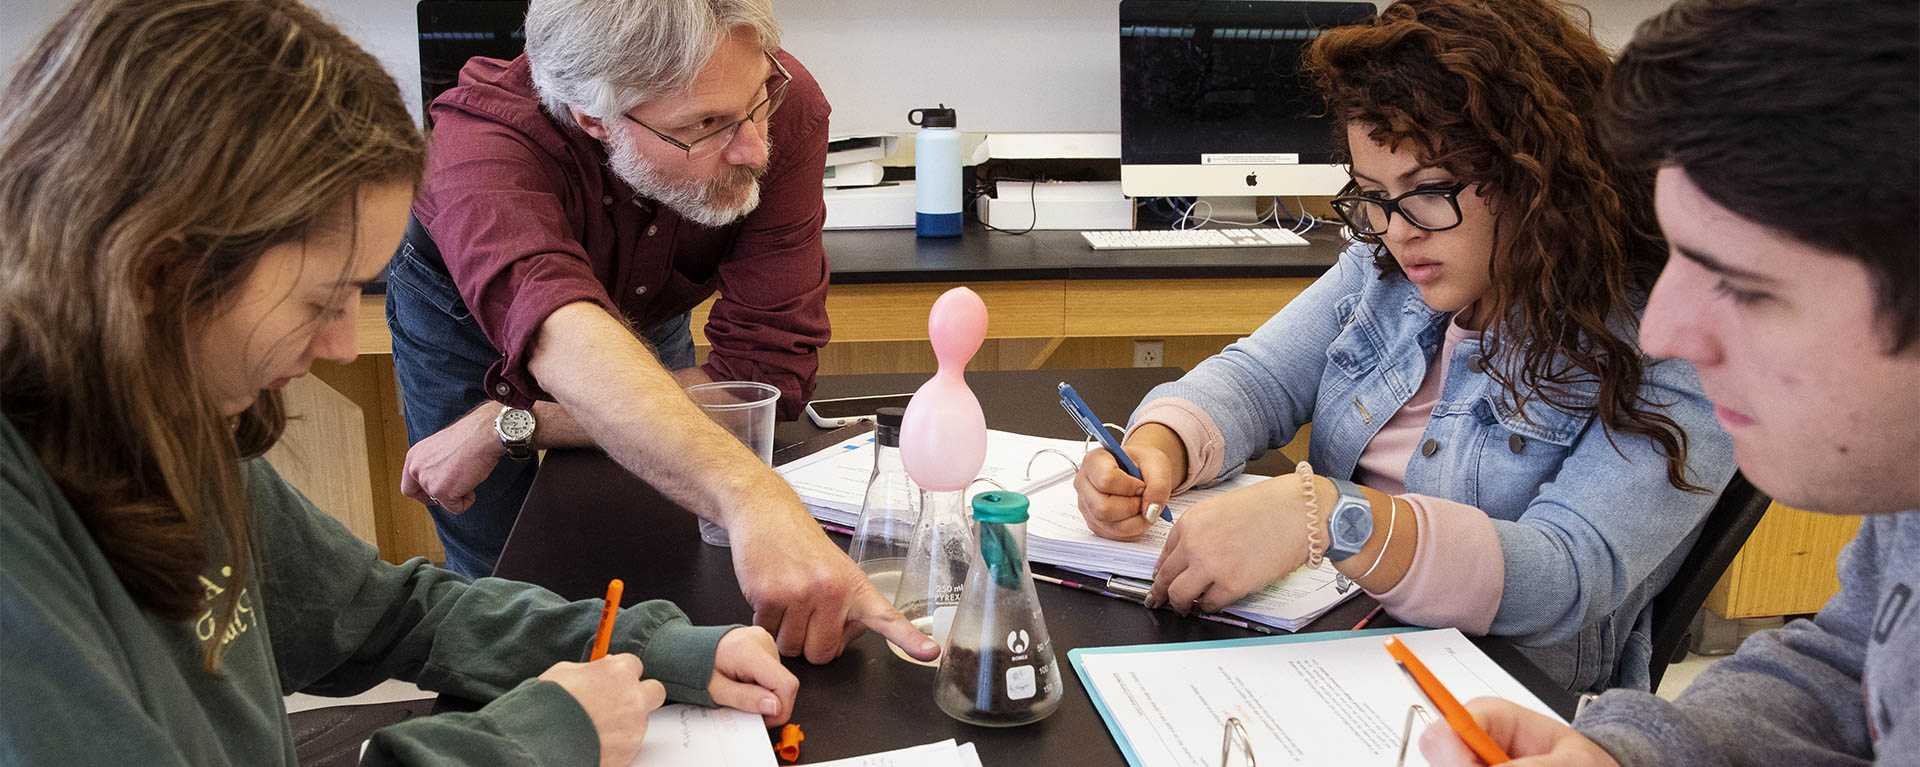 A physics professor and group of students discuss an experiment in the lab.